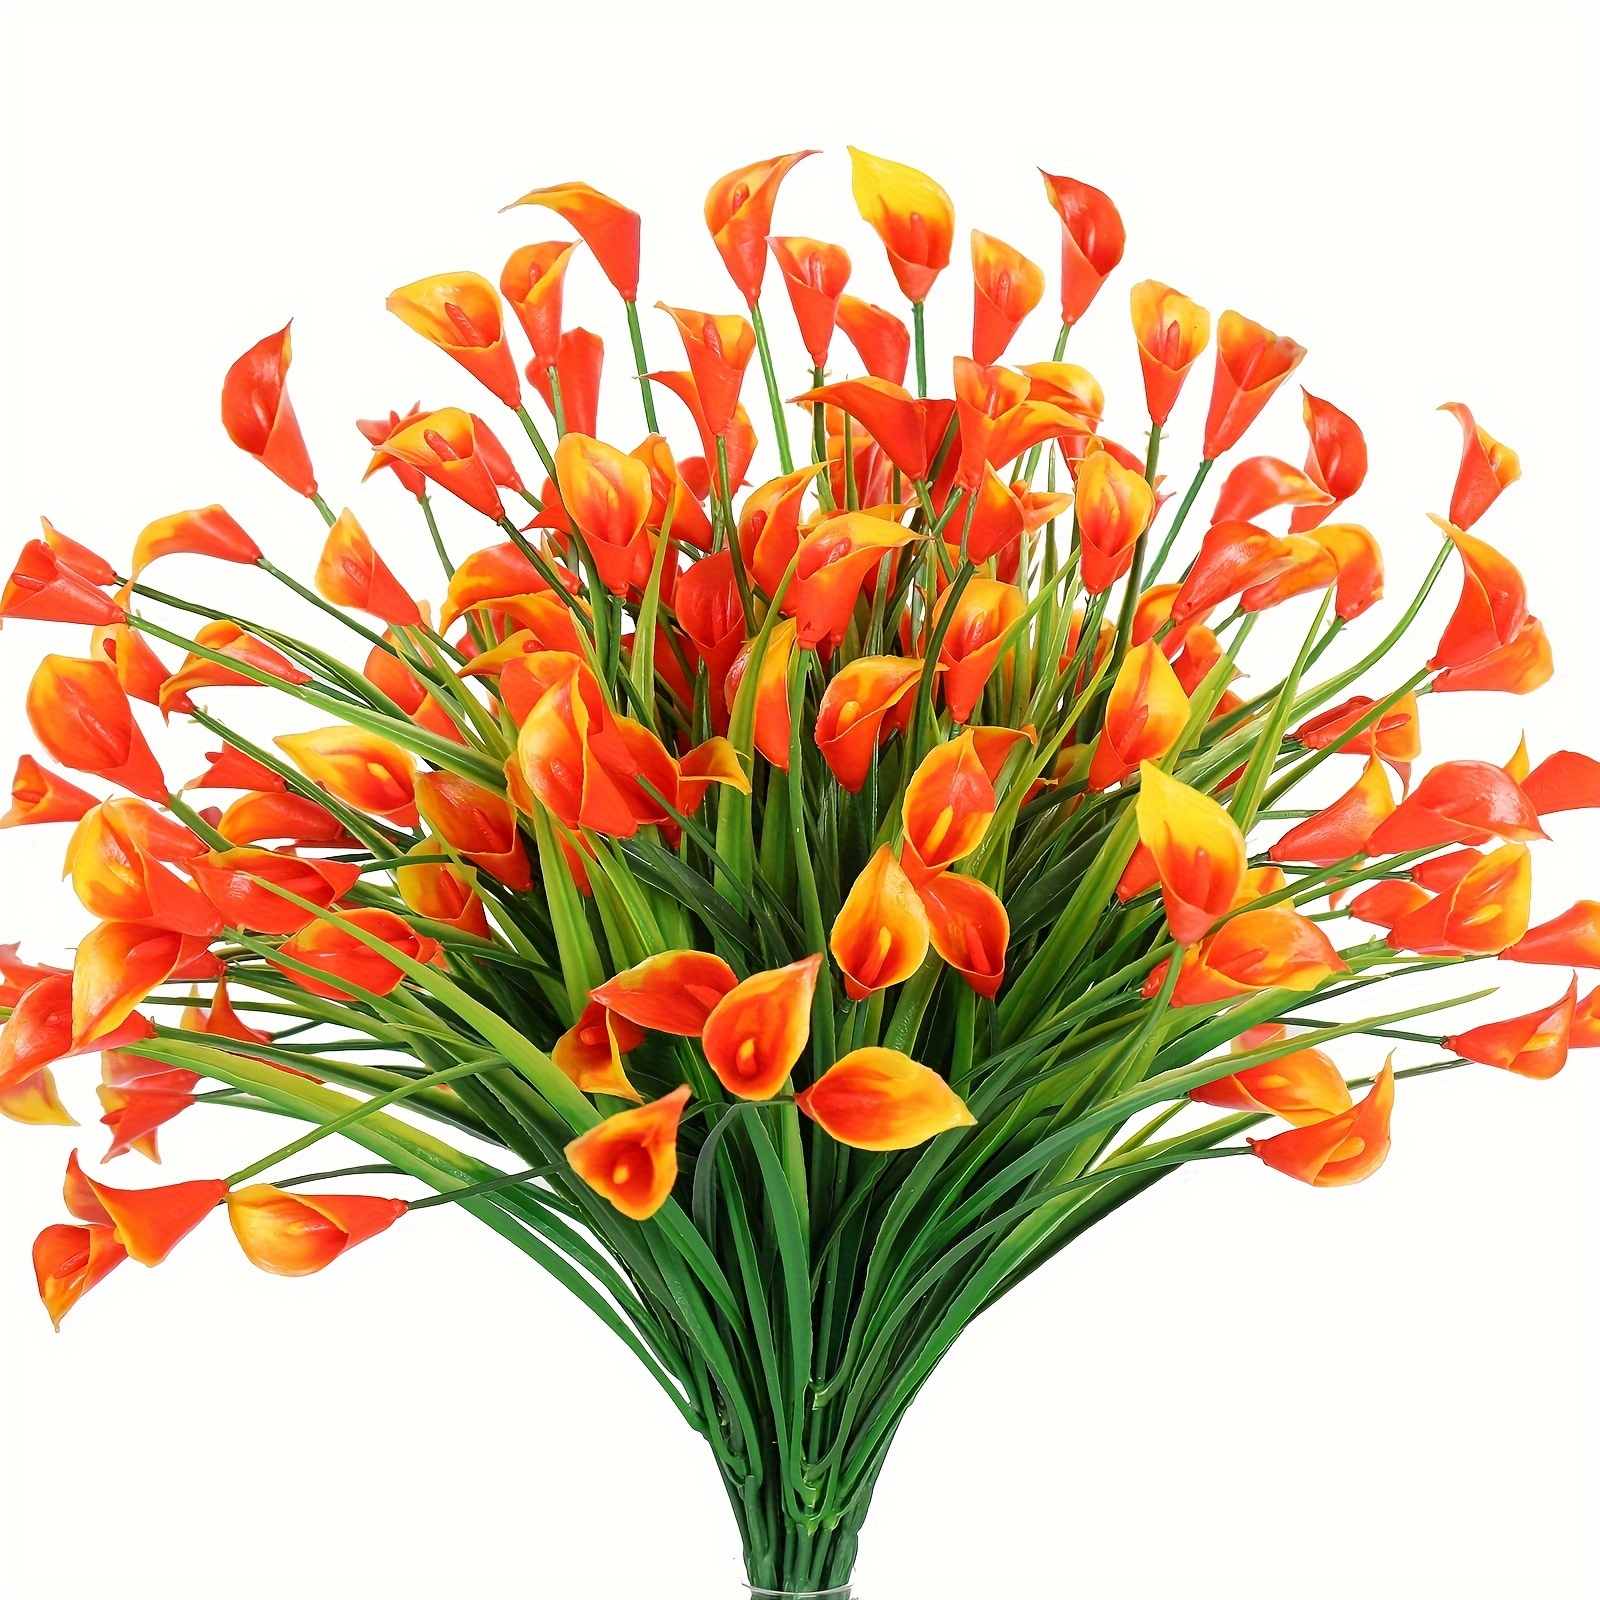 

4-pack Vibrant Orange Calla Lily Artificial Flowers - Perfect For Indoor & Outdoor Decor, Weddings, Anniversaries, And Home Accents - Durable Plastic, No Power Needed